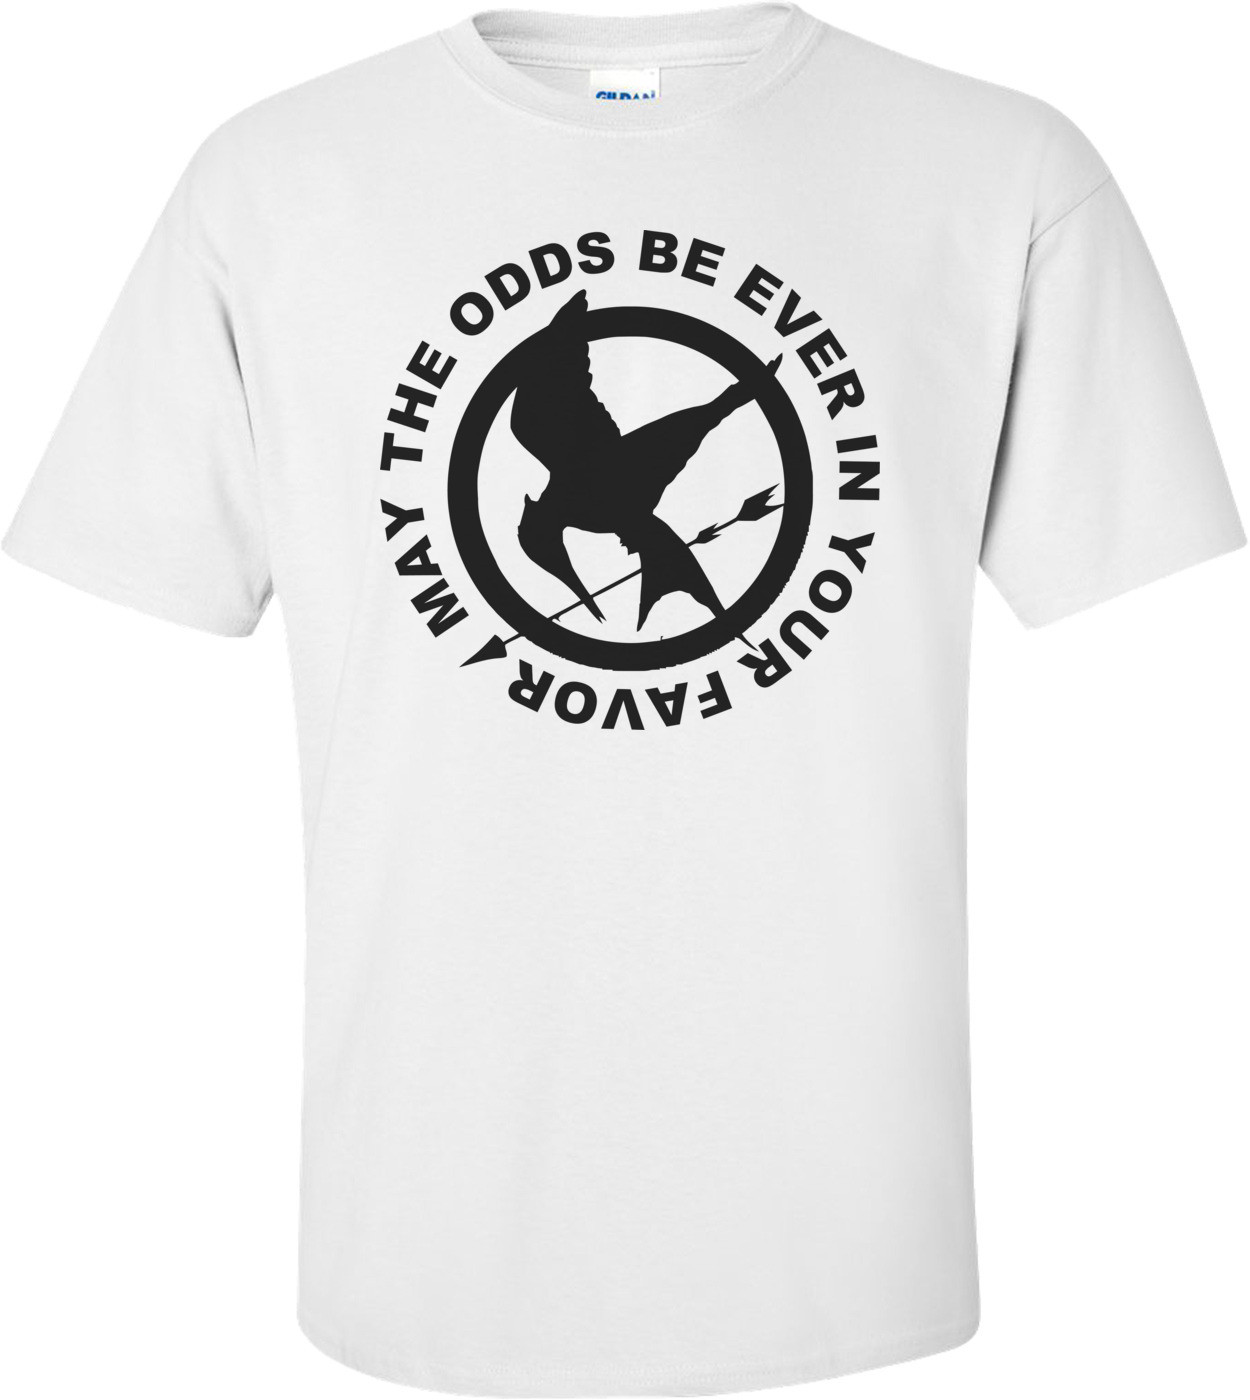 May The Odds Be Ever In Your Favor - The Hunger Games Shirt